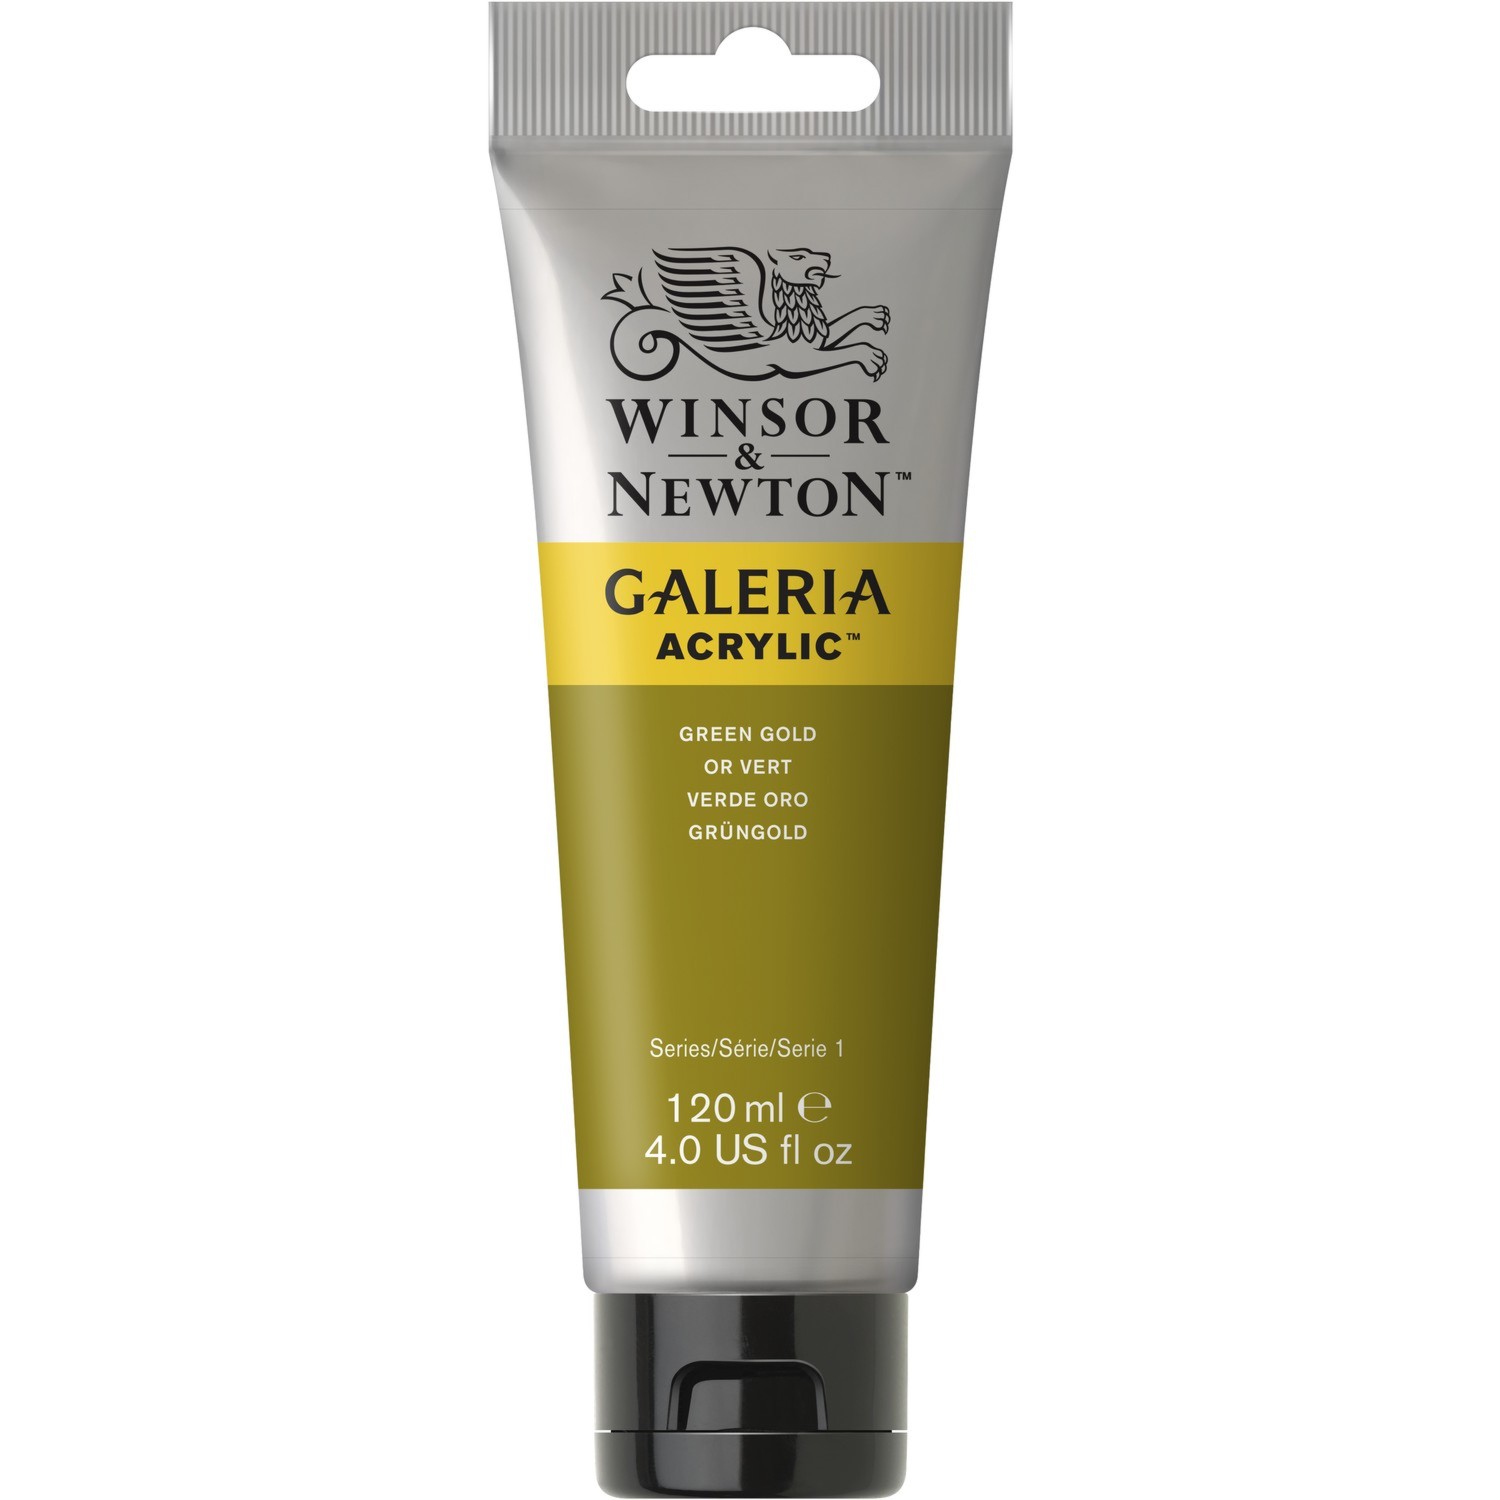 Winsor and Newton 120ml Galeria Acrylic Colour Paint - Green Gold Image